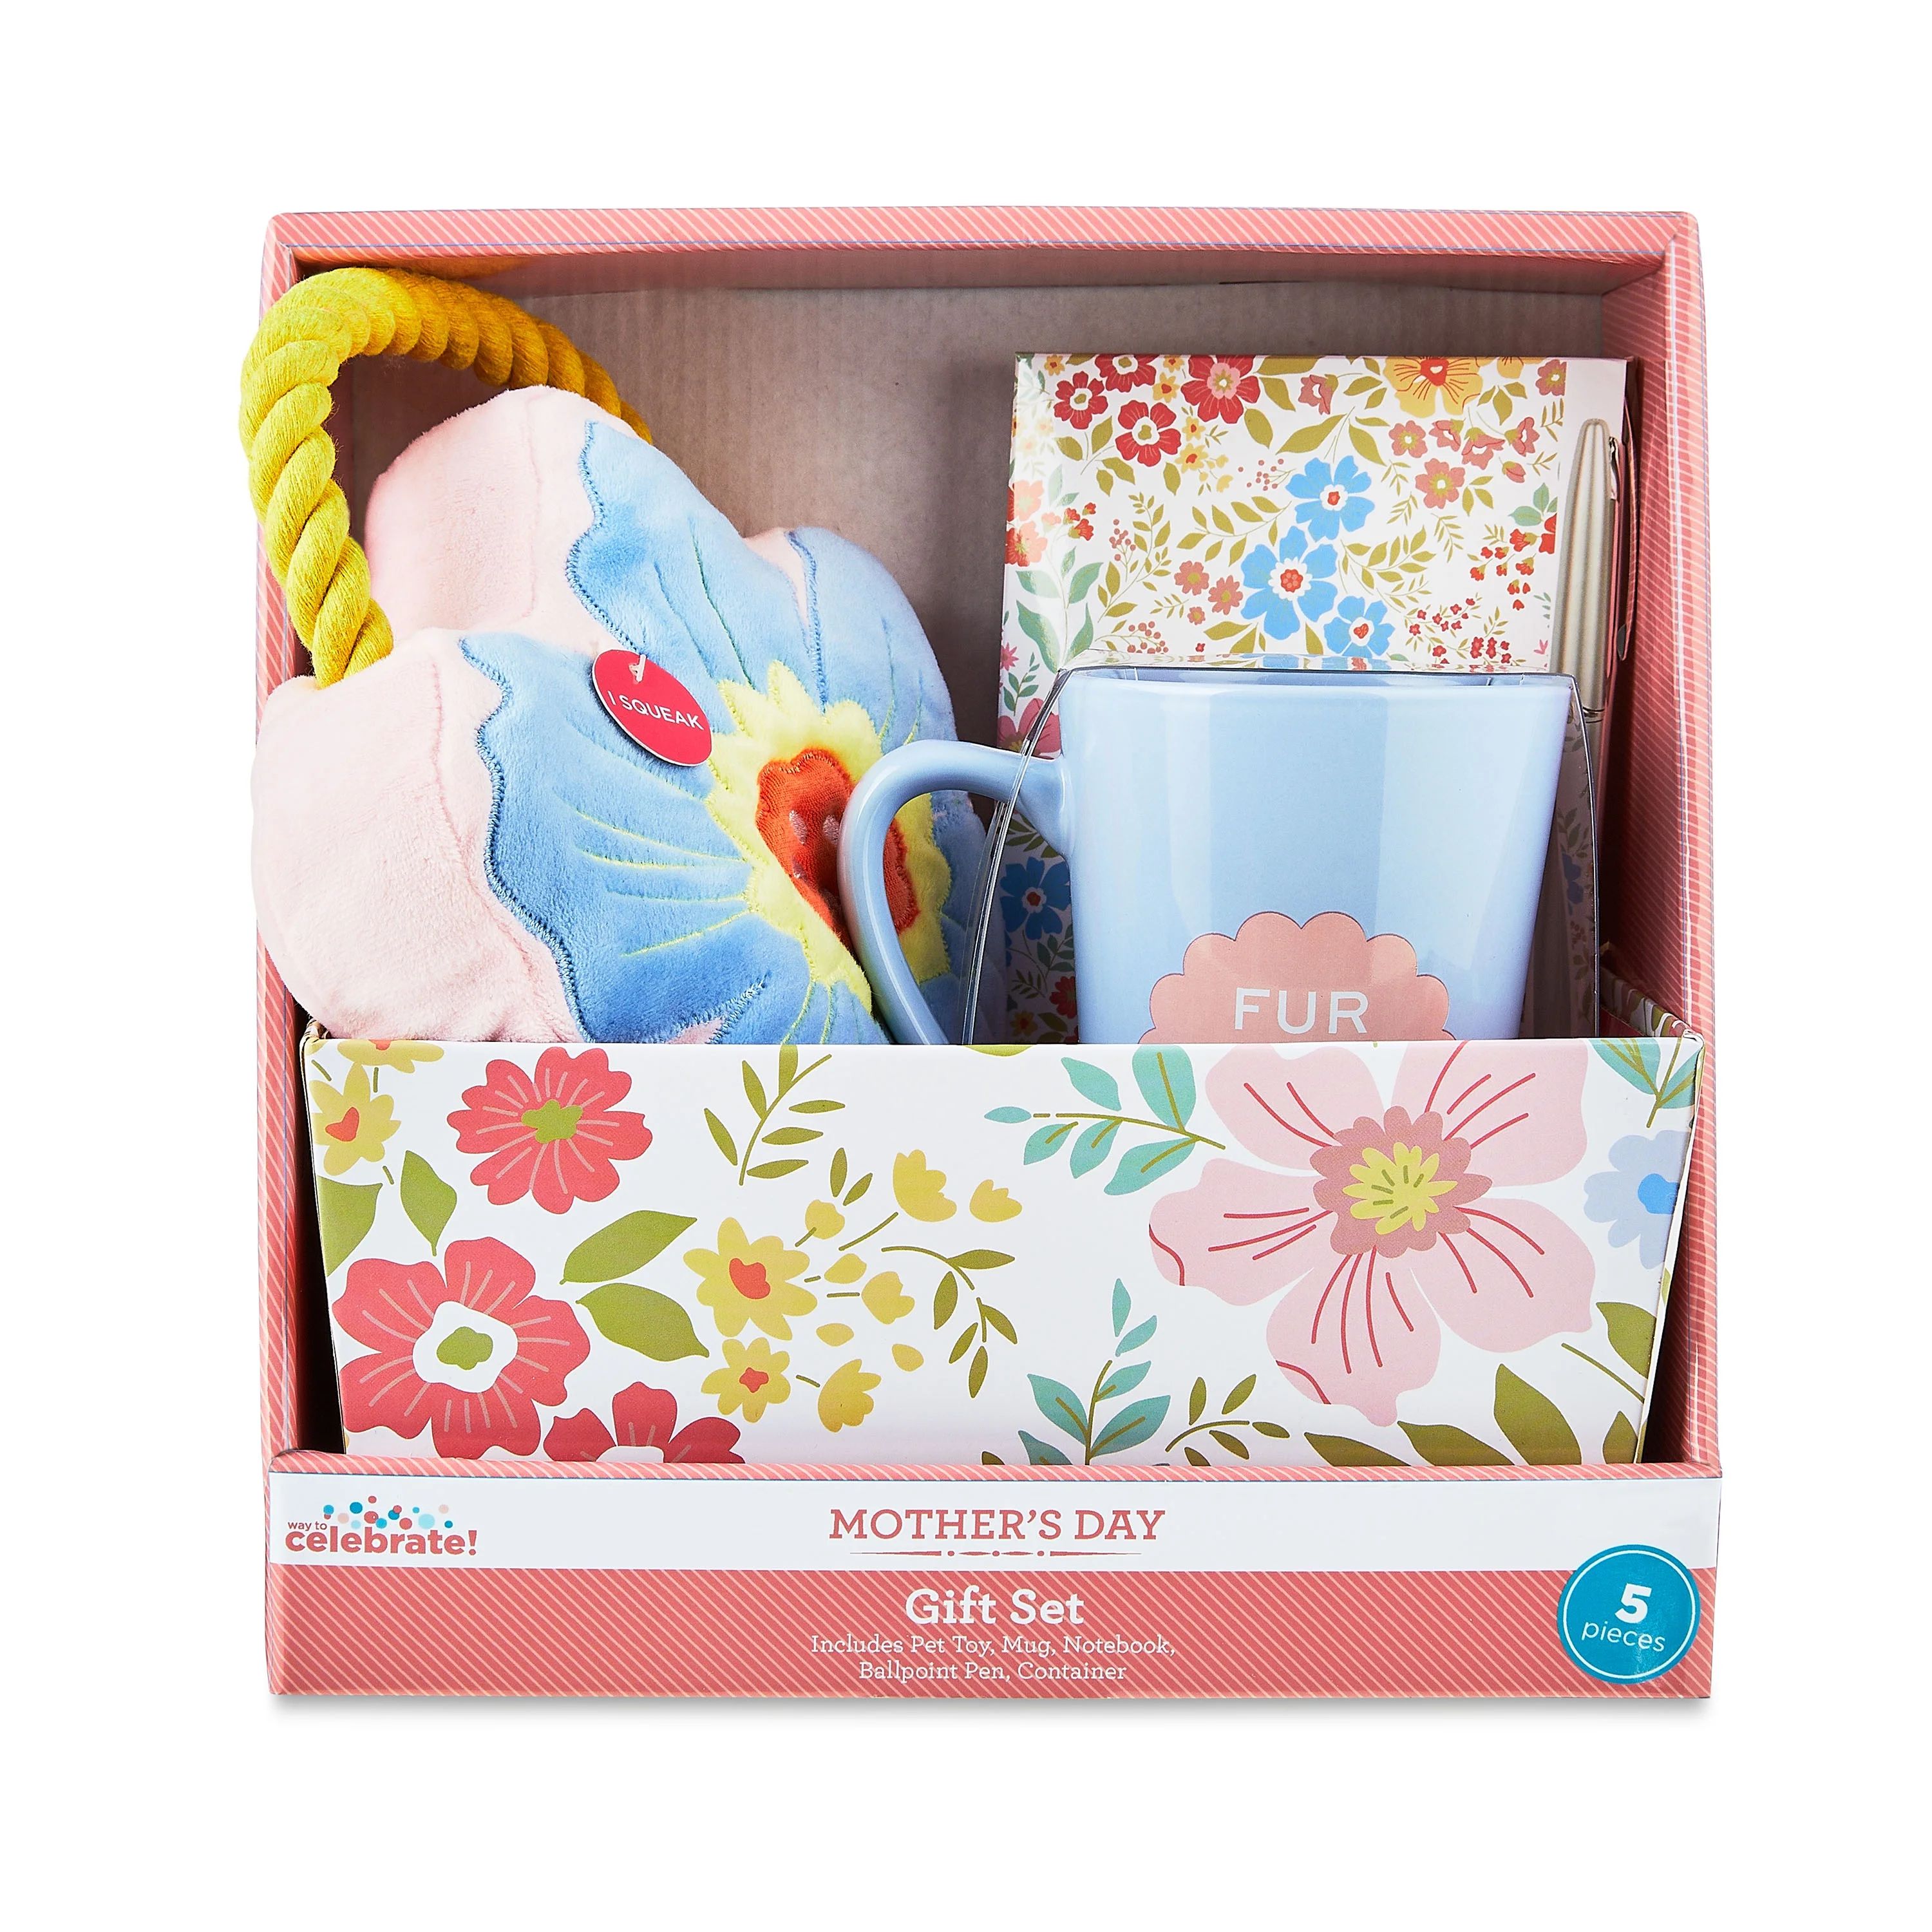 Way to Celebrate Mother’s Day Fur Mom Gift Set | Walmart (US)